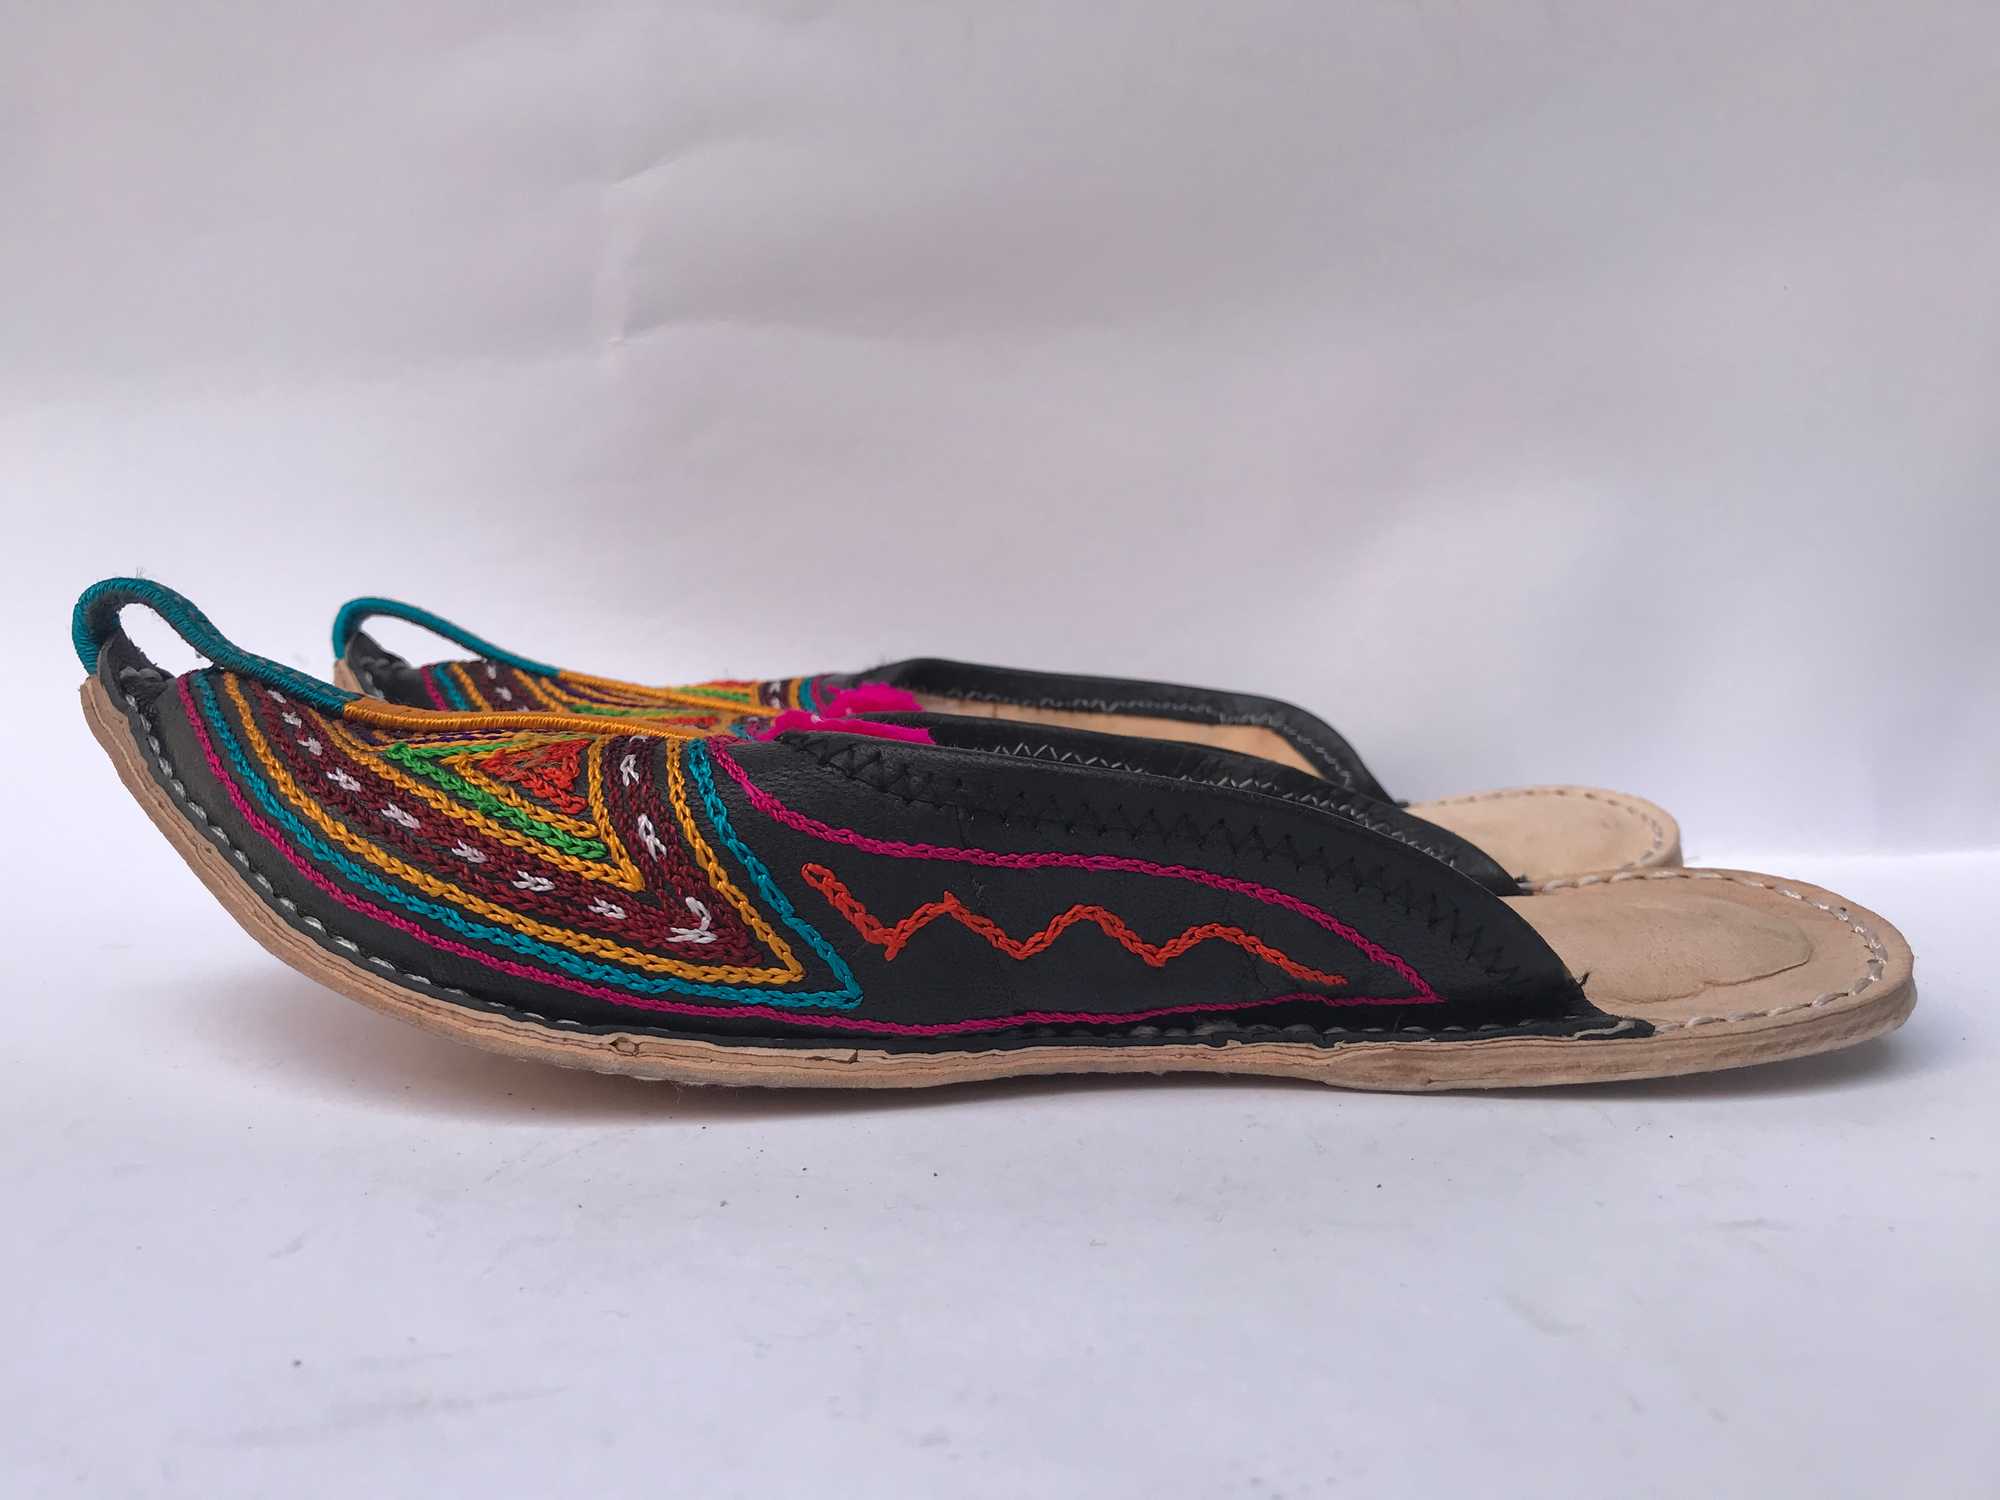 Nepali Handmade Aladdin Sandals, With Leather And Bead Design